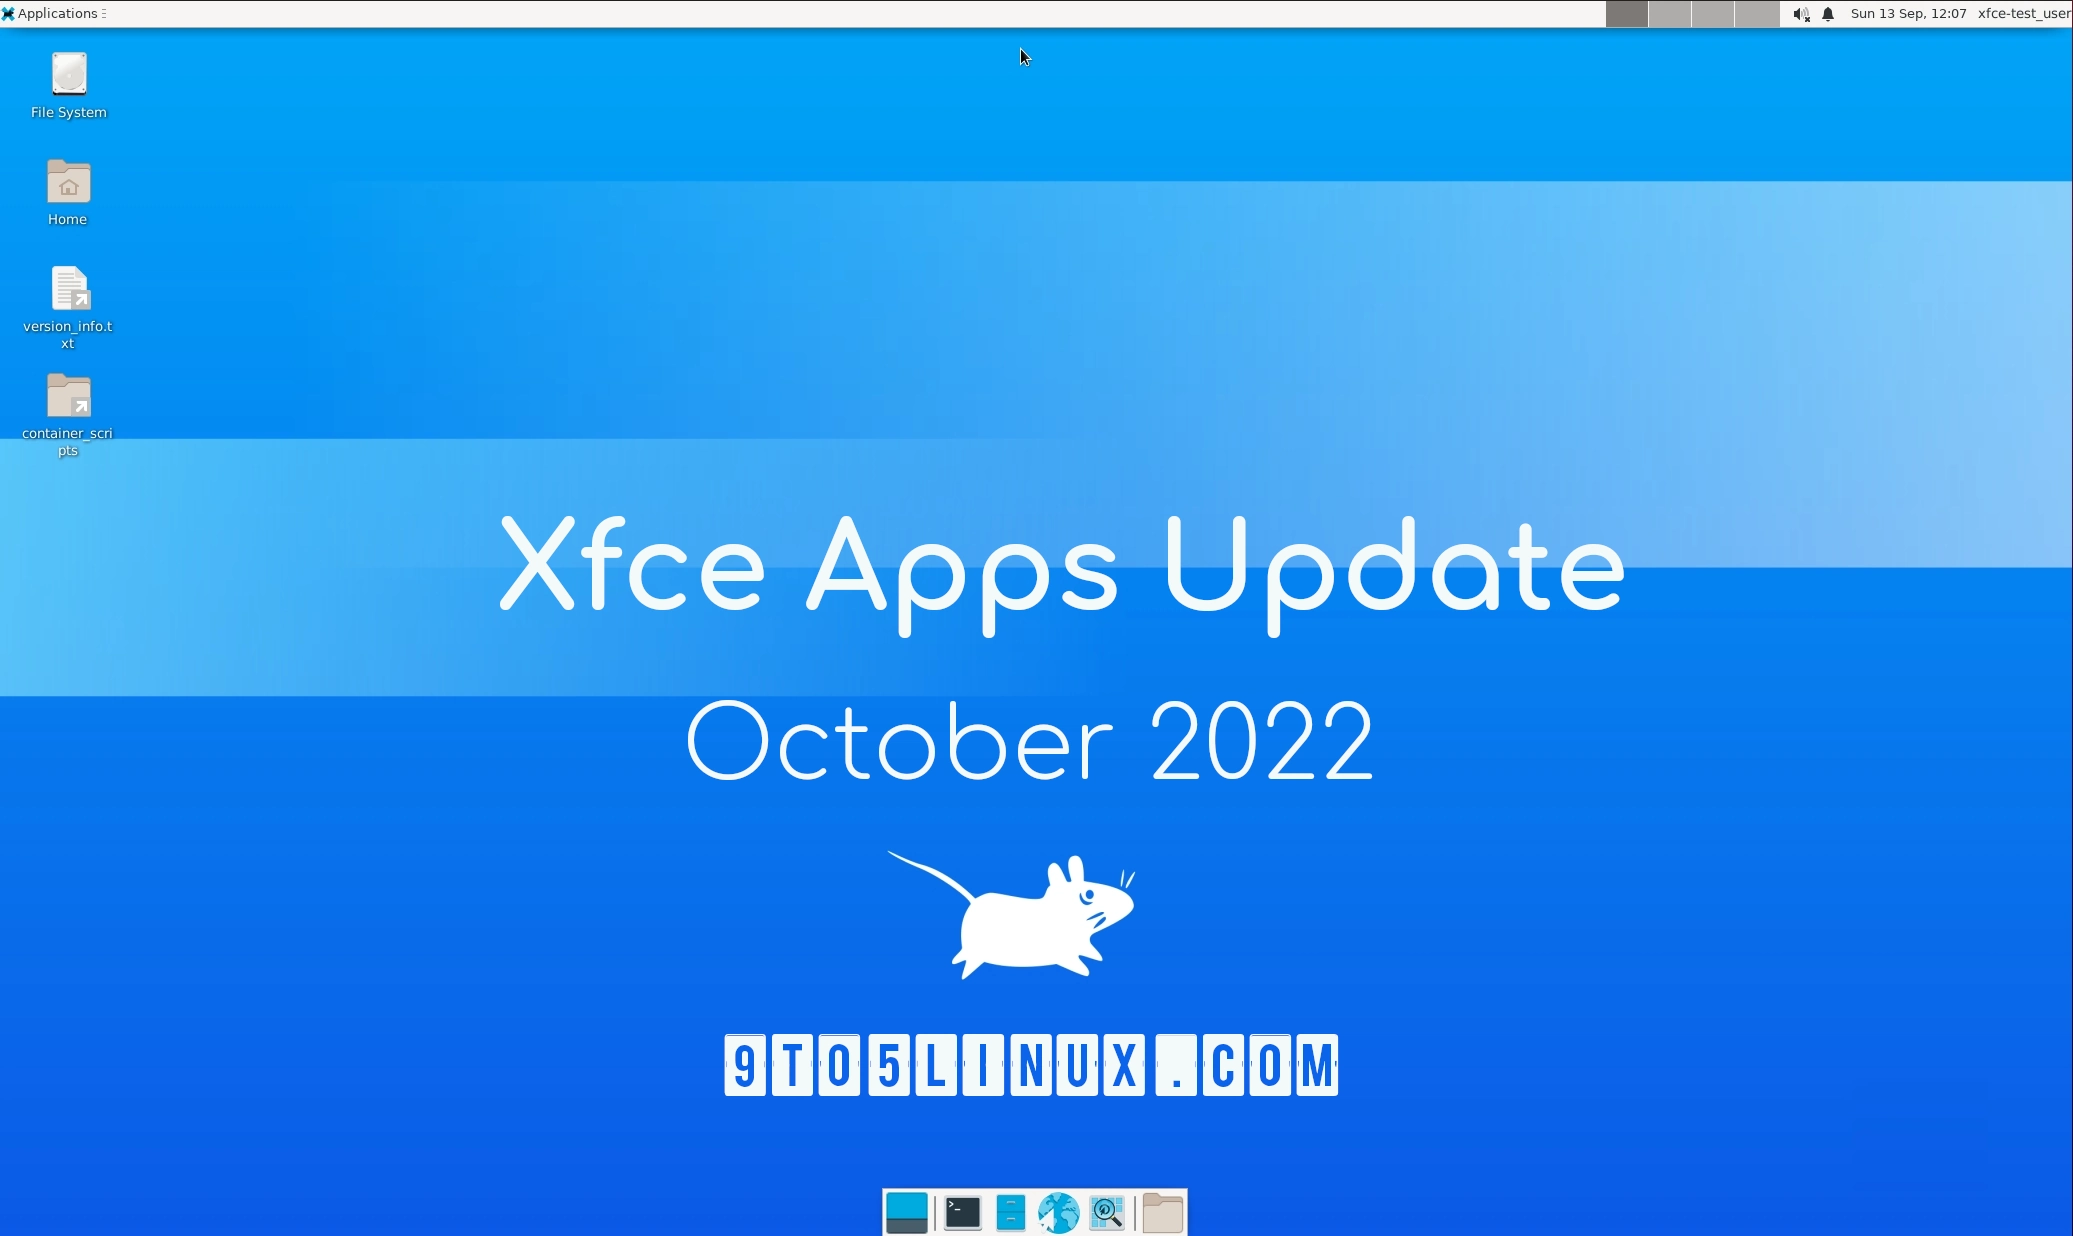 Xfce’s Apps Update for October 2022: Thunar Gets More New Features Towards Xfce 4.18